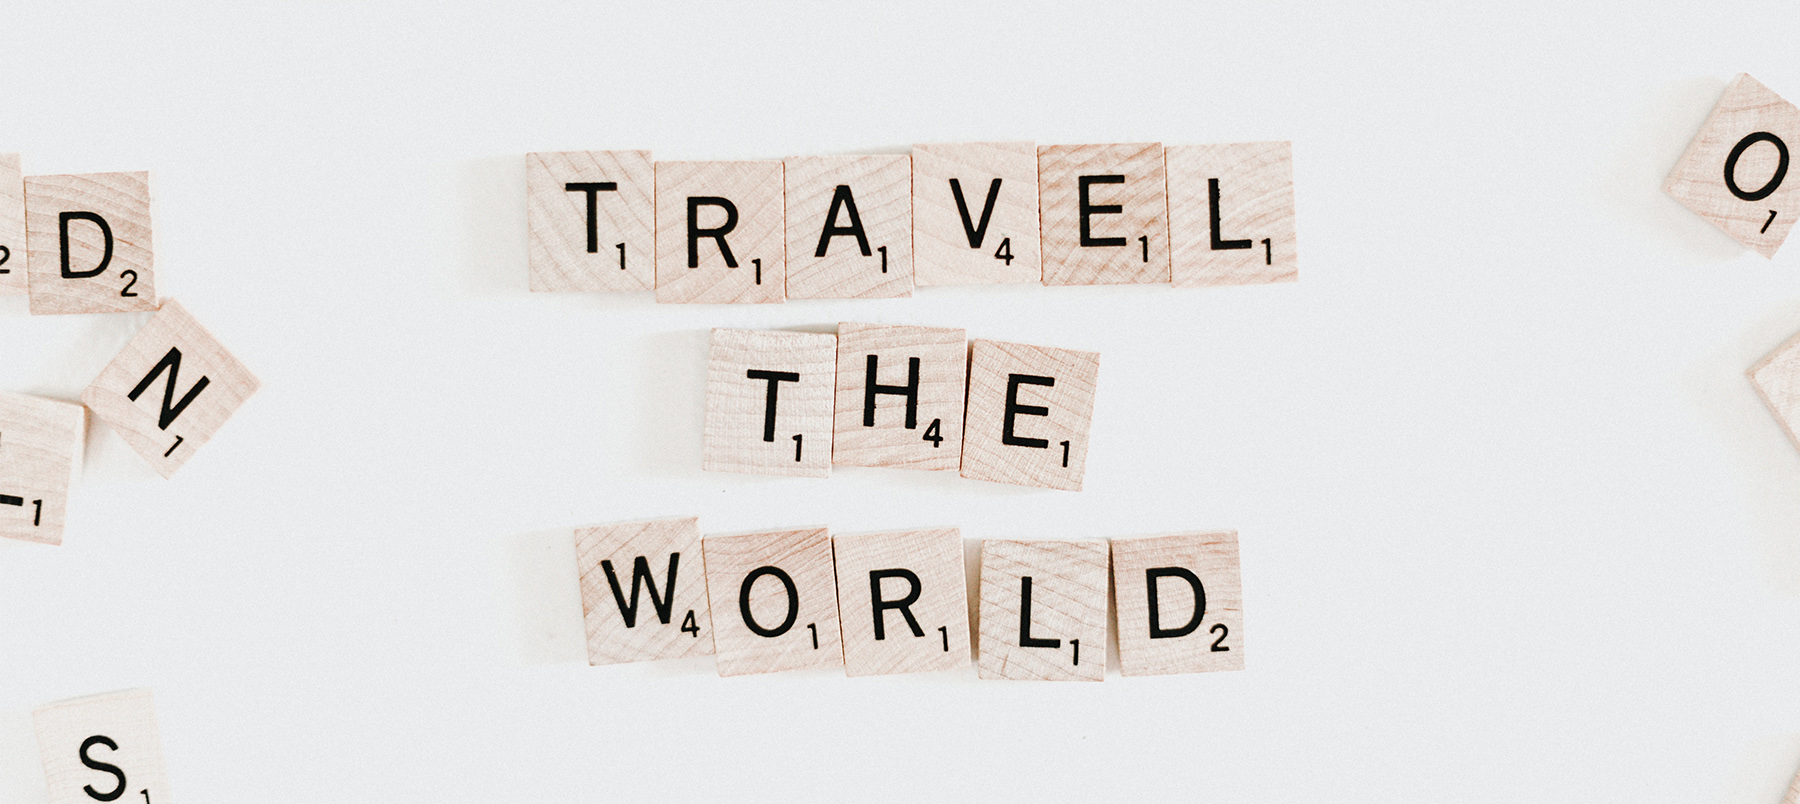 Scrabble letters 'Travel the world'